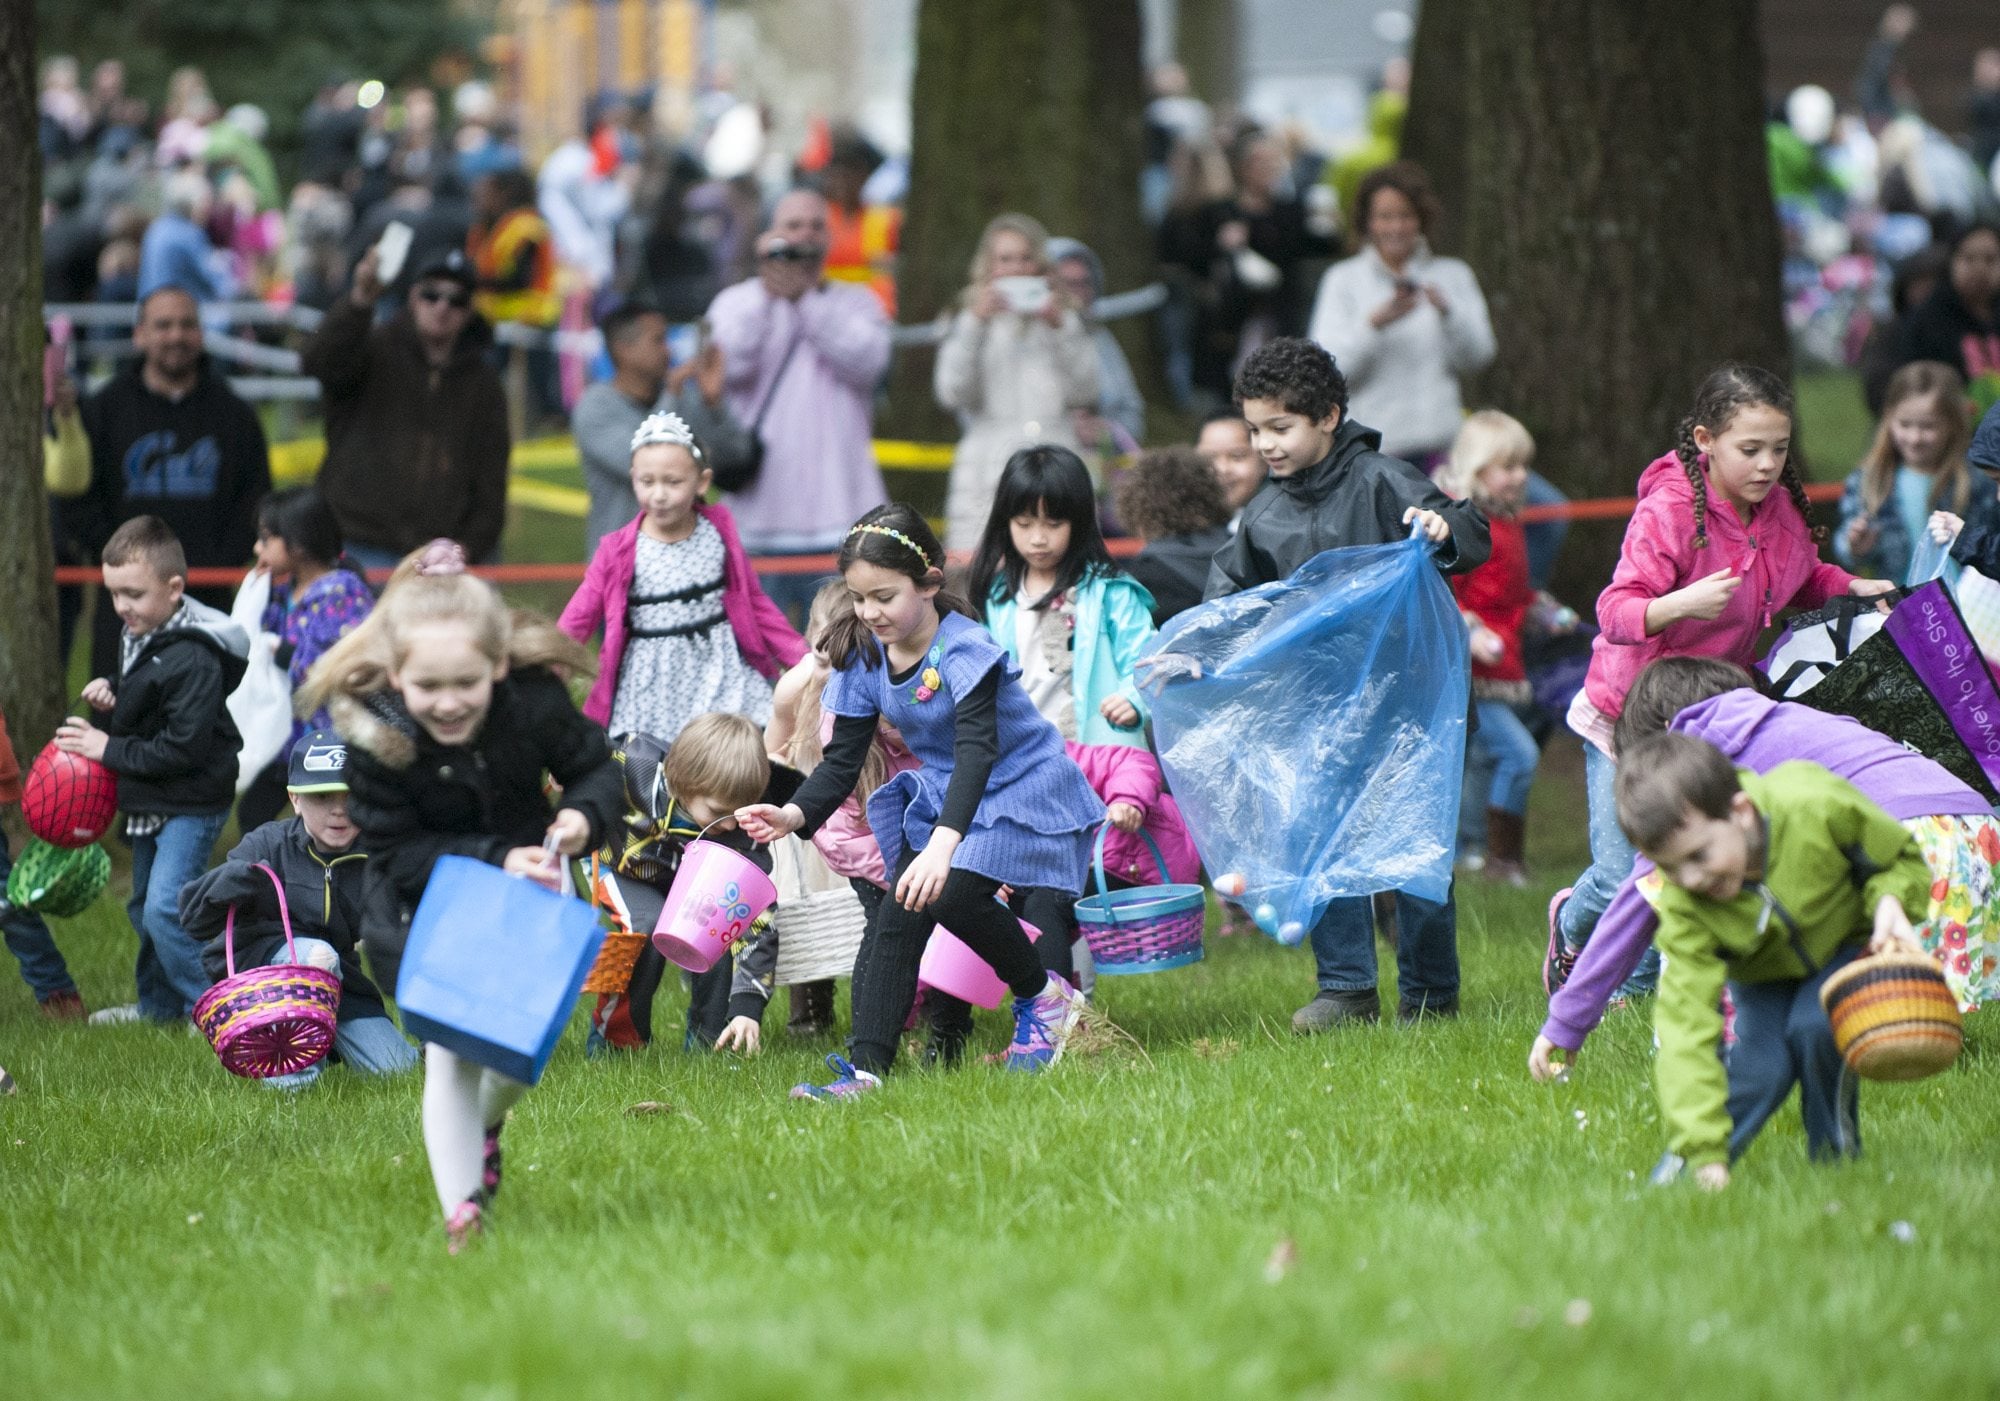 Children hurry to collect plastic eggs Sunday at an Easter egg hunt at Crown Park in Camas. About 2,000 people attended the free event.